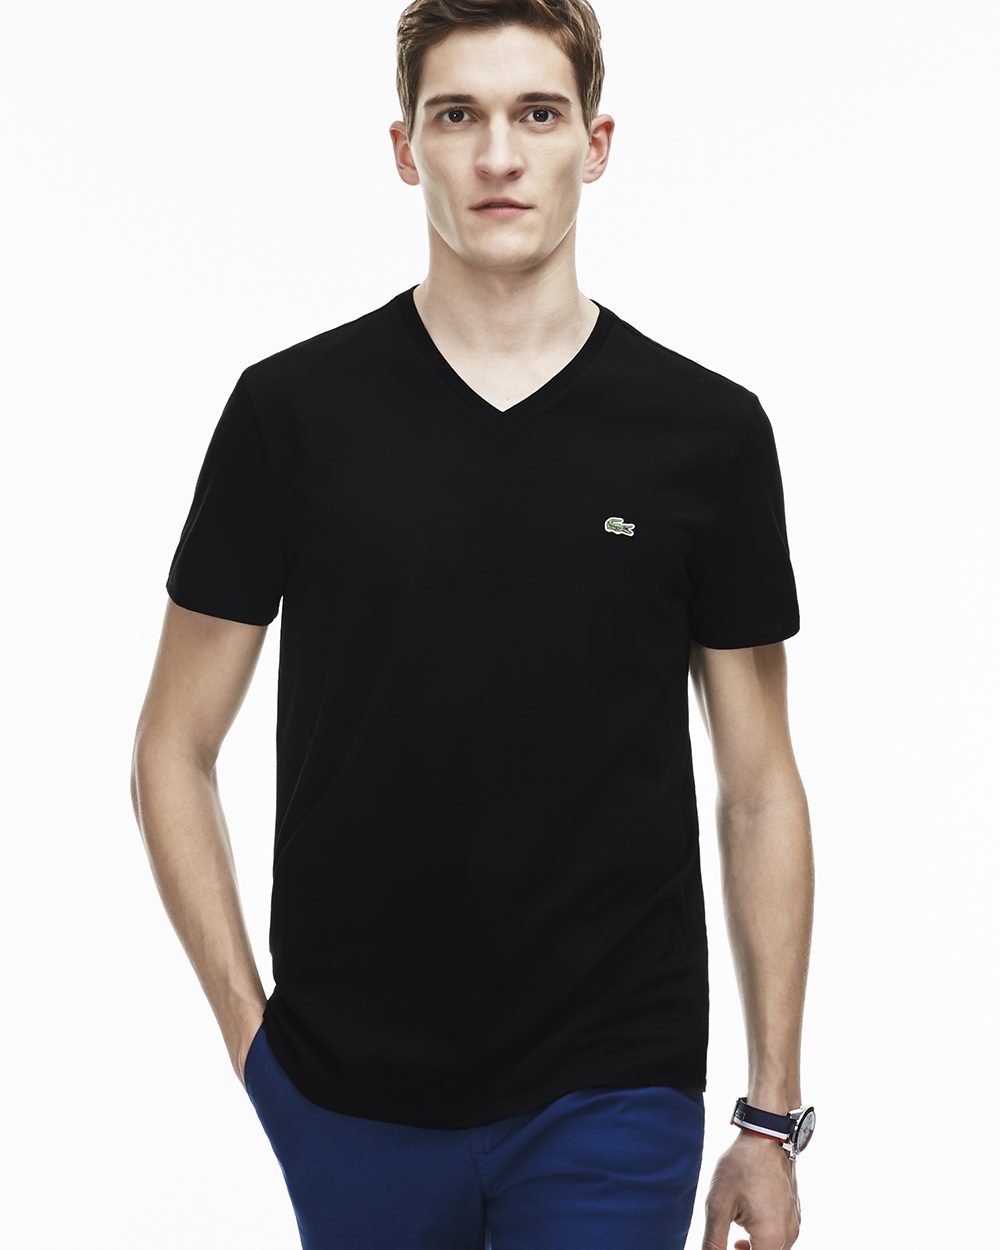 Lacoste Pima Cotton V-Neck T-Shirt - TH6710-51 - Wescan Embroidery ...